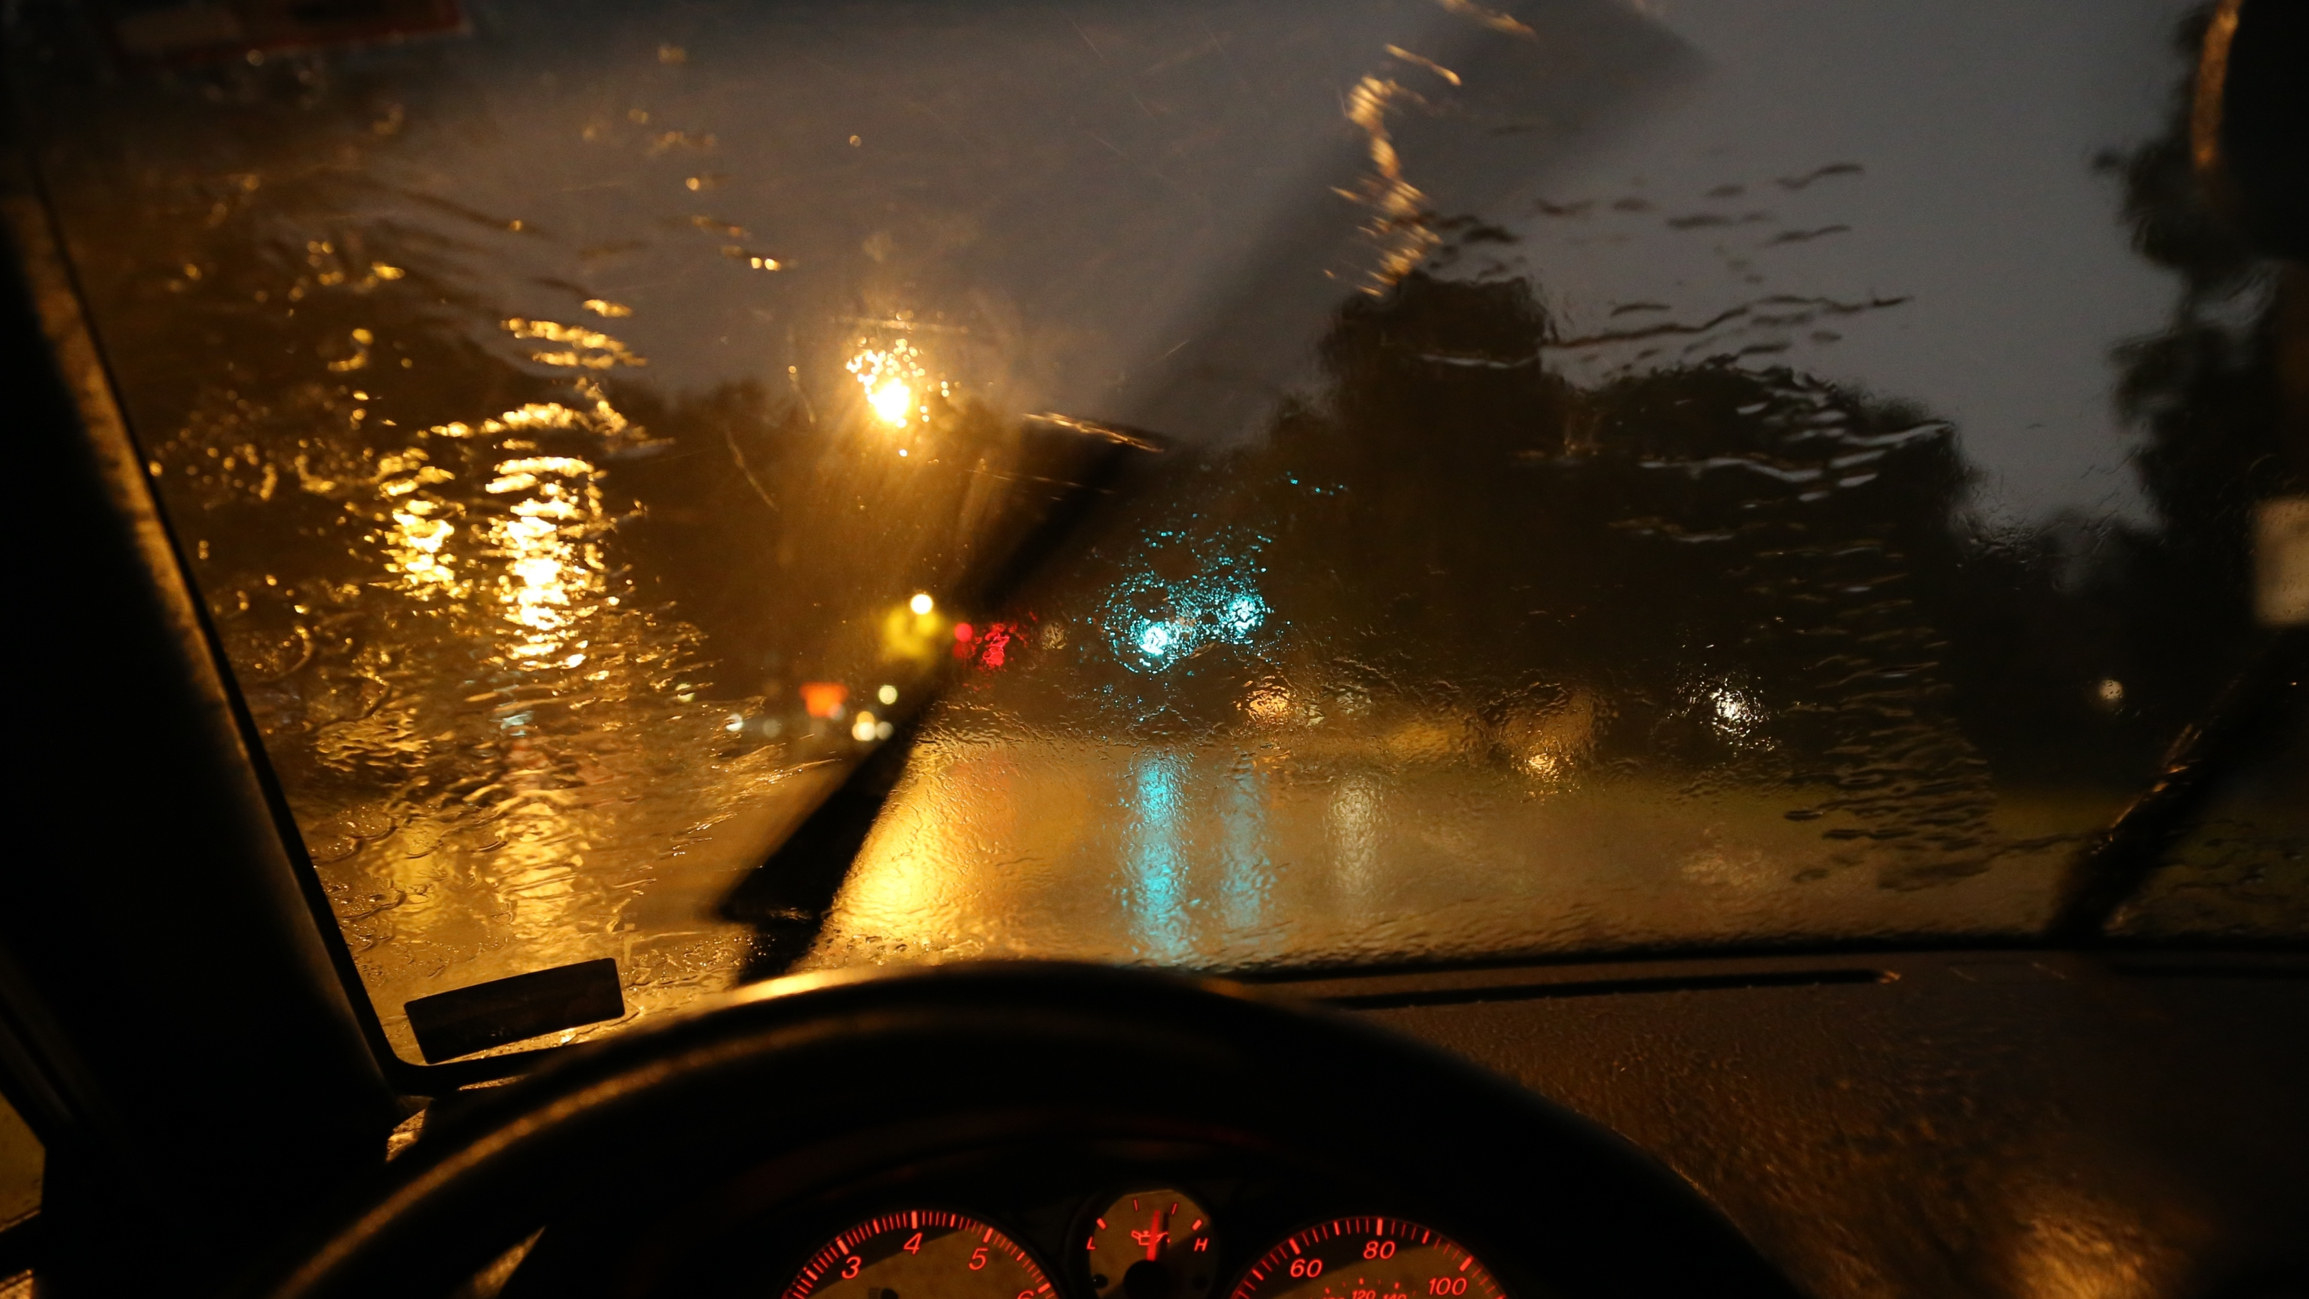 View of the road from a car on a rainy night